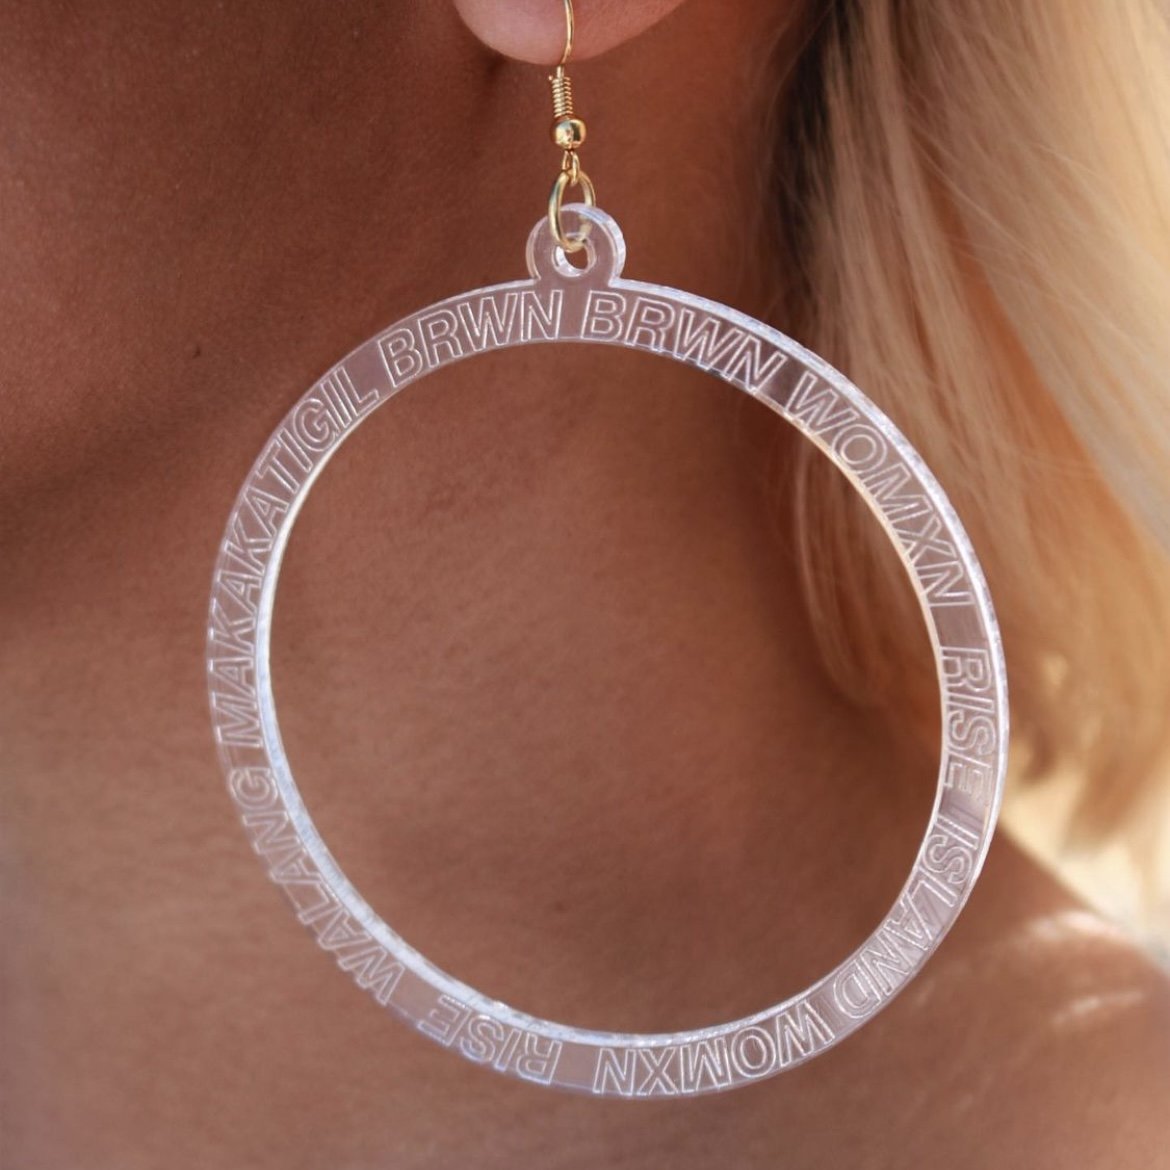  These earrings were made in collaboration with Bay Area rapper Ruby Ibarra. The Tagalog words  walang makakatigil  translates to “nothing can stop [us].”  